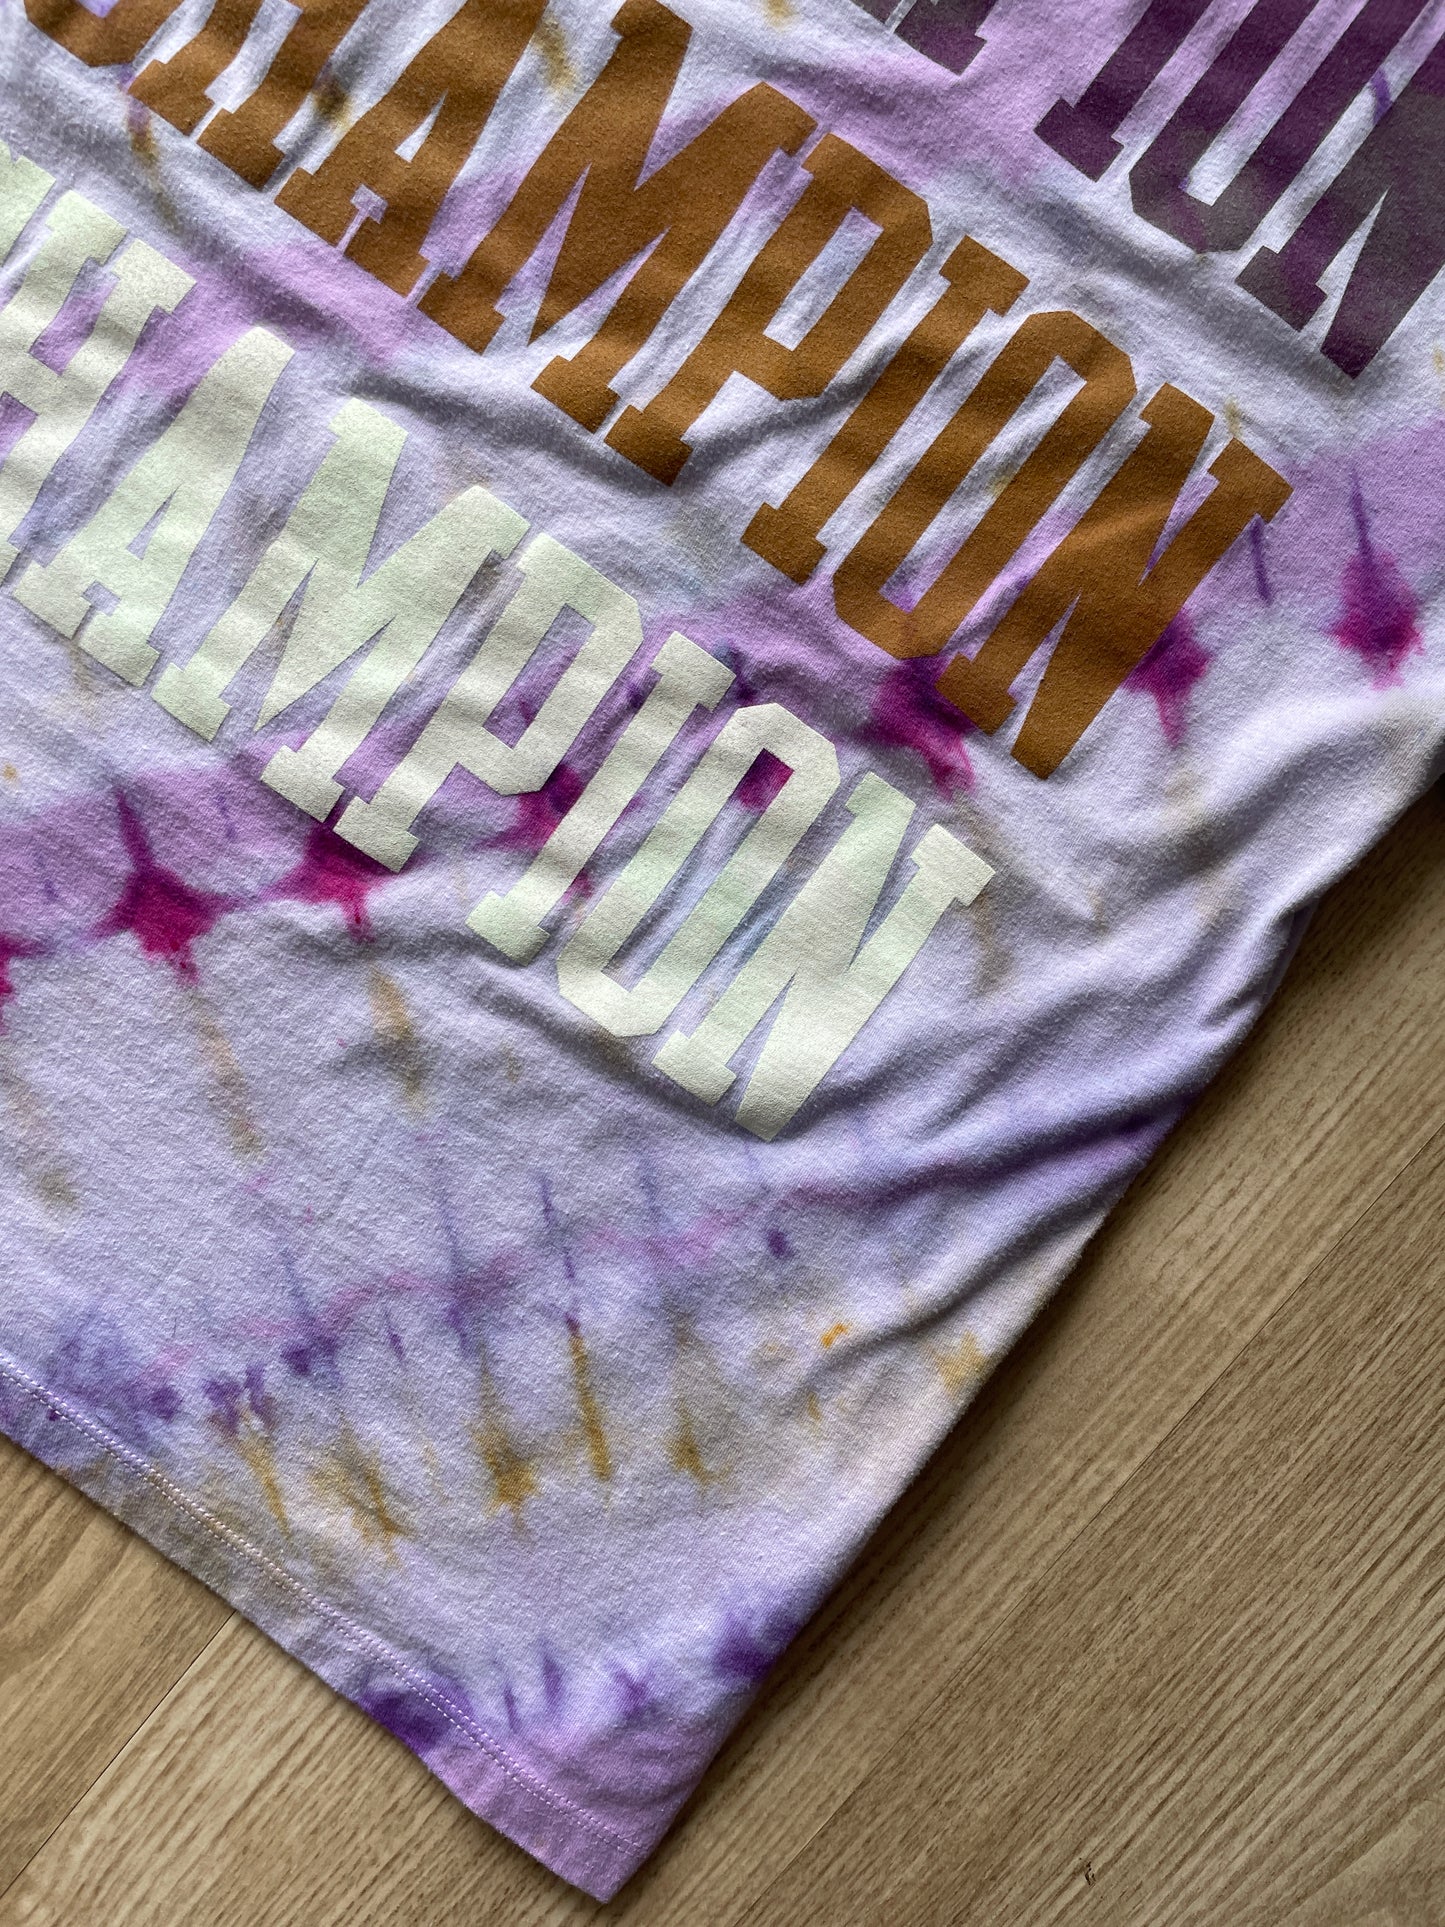 MEDIUM Women’s Champion Handmade Tie Dye T-Shirt | One-Of-a-Kind Pink and Gold Short Sleeve